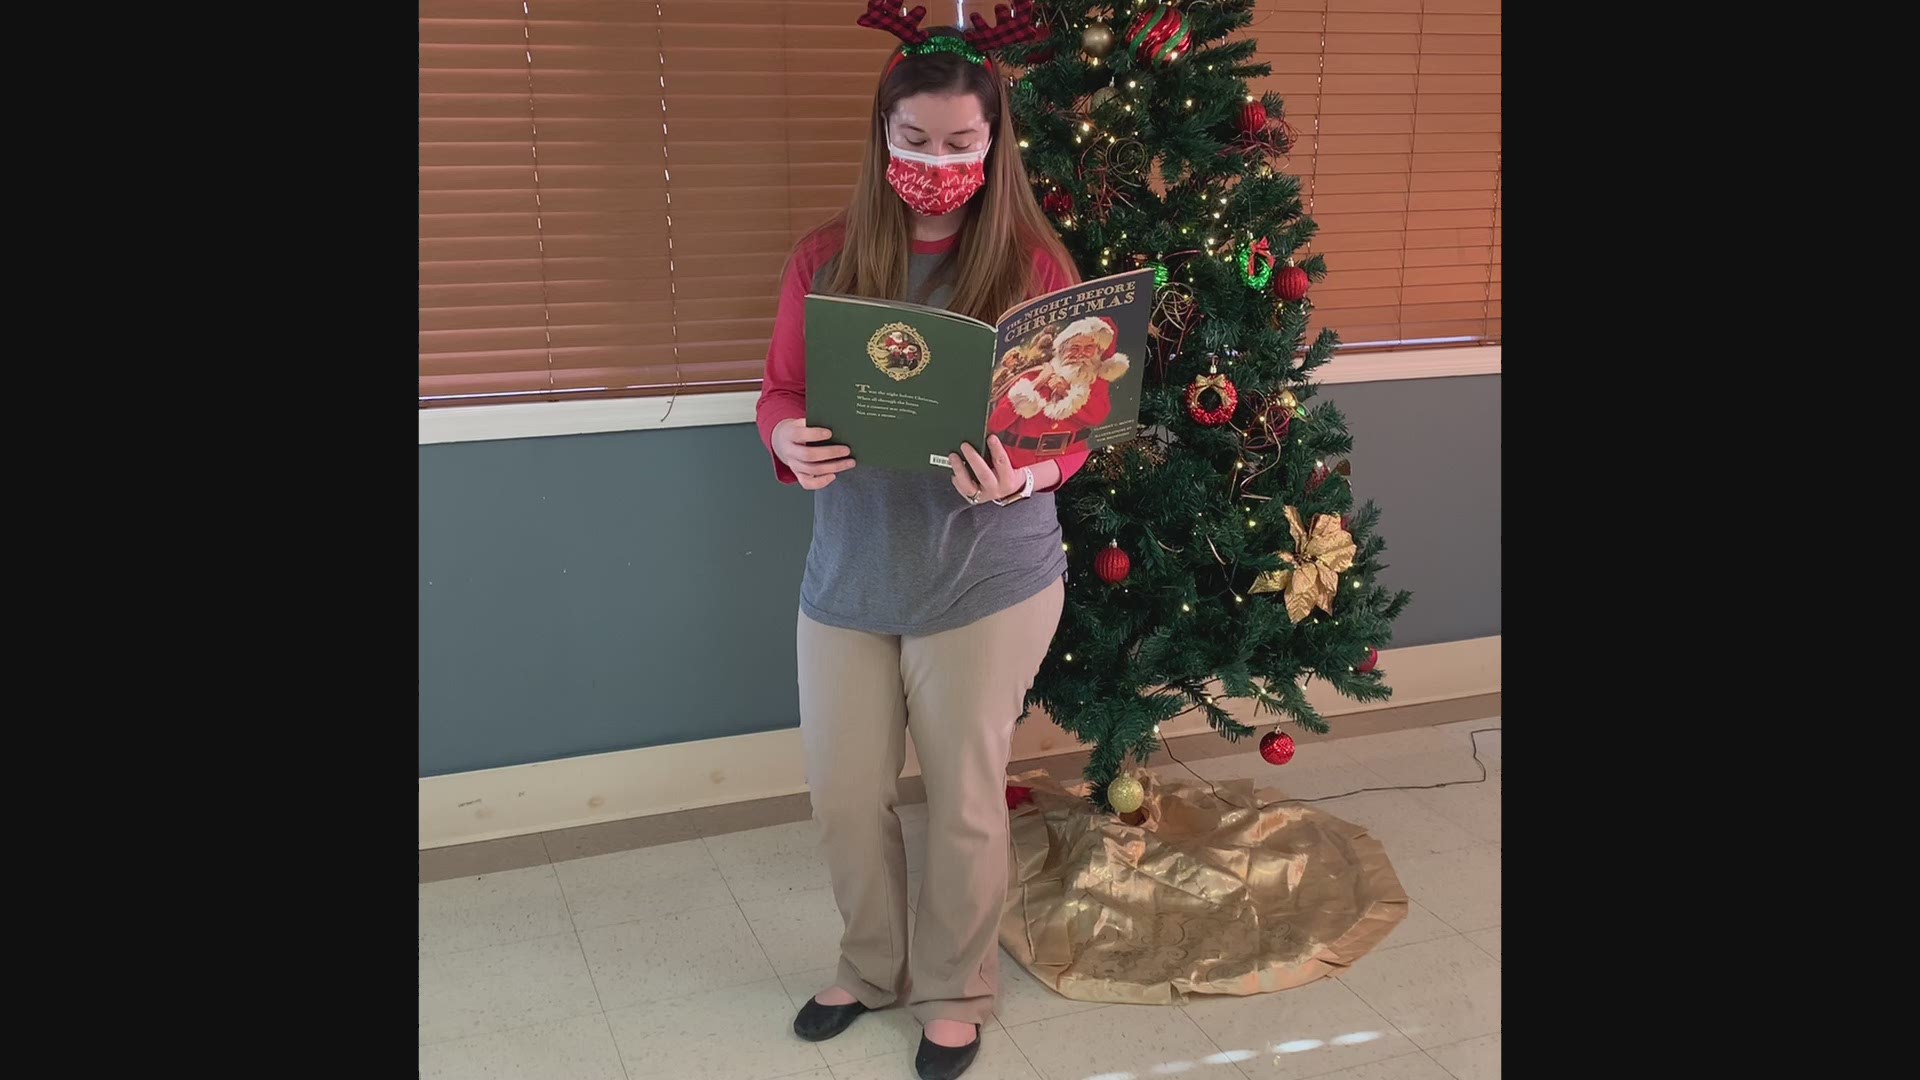 Listen to the people at Bryant Health & Rehab read the Christmas classic!